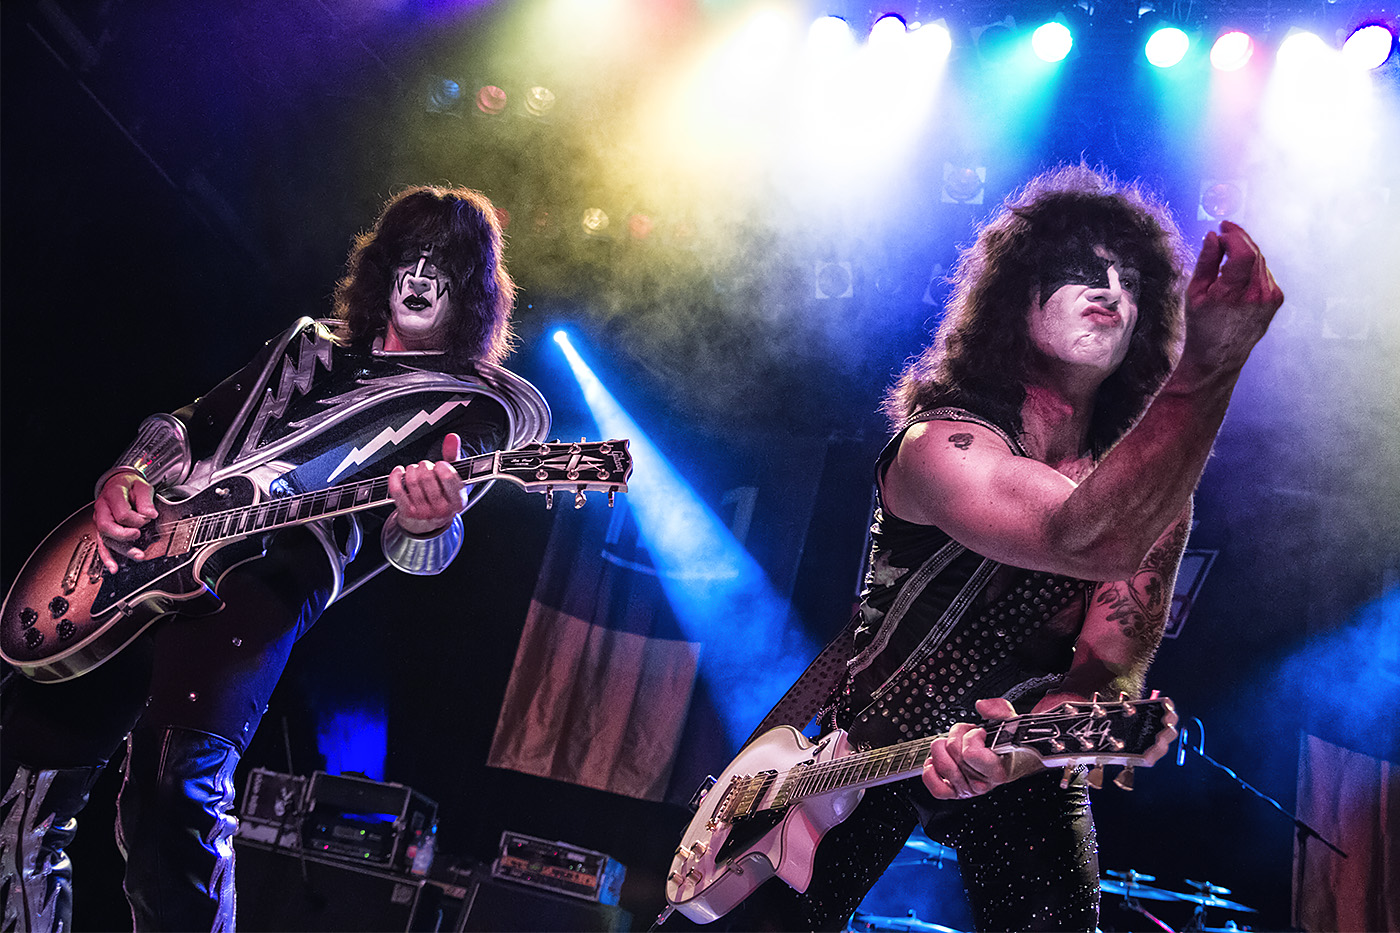 Kiss forever Band Open Doors Festival Zoltan Marothy und Zoltan Vary